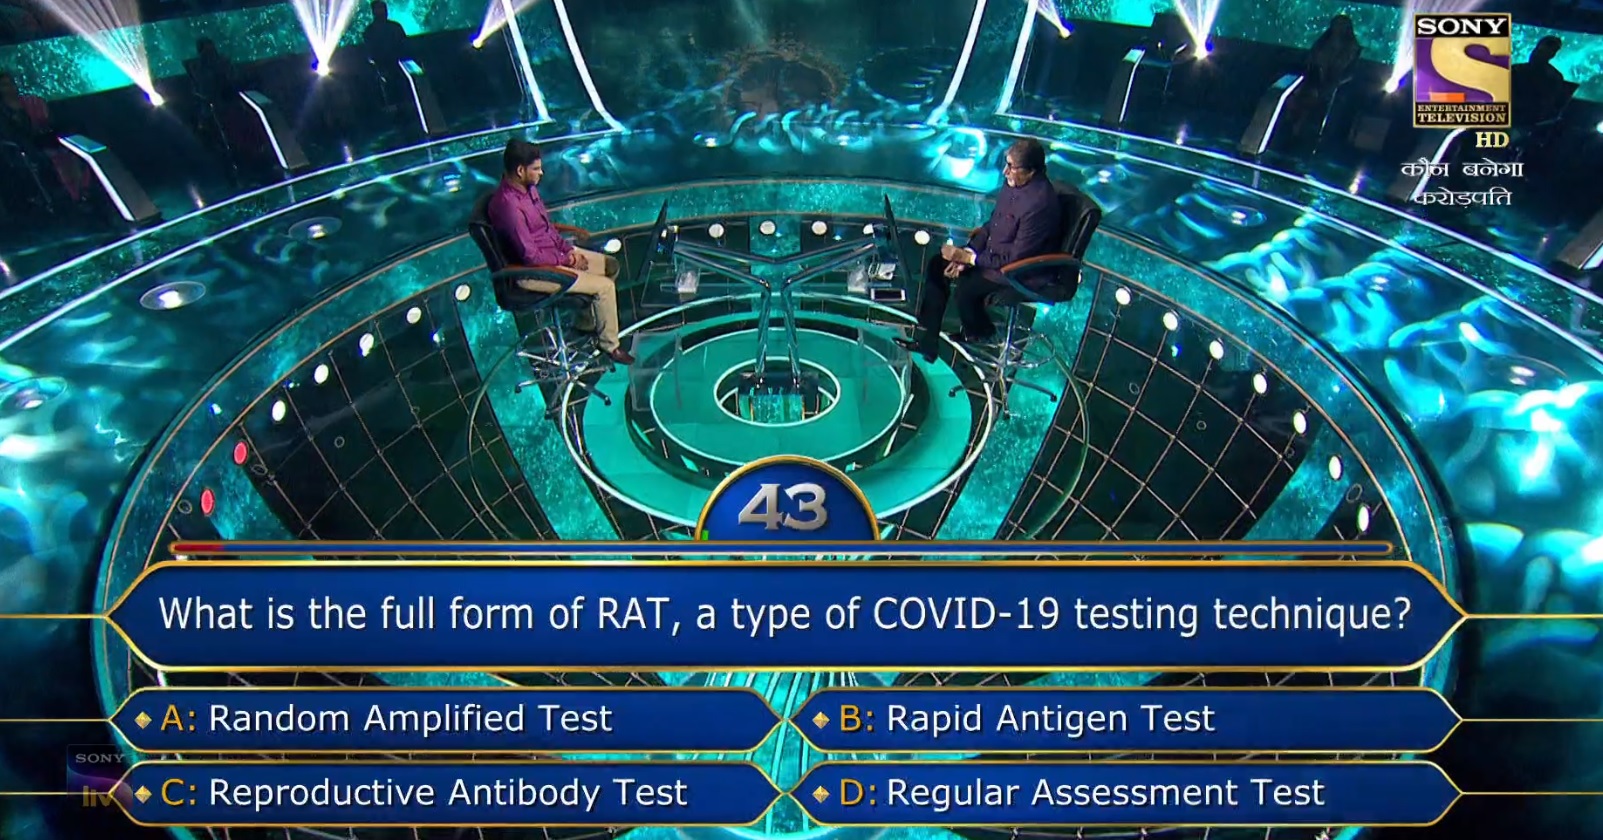 Ques : What is the full form of RAT, a type of COVID-19 testing technique?